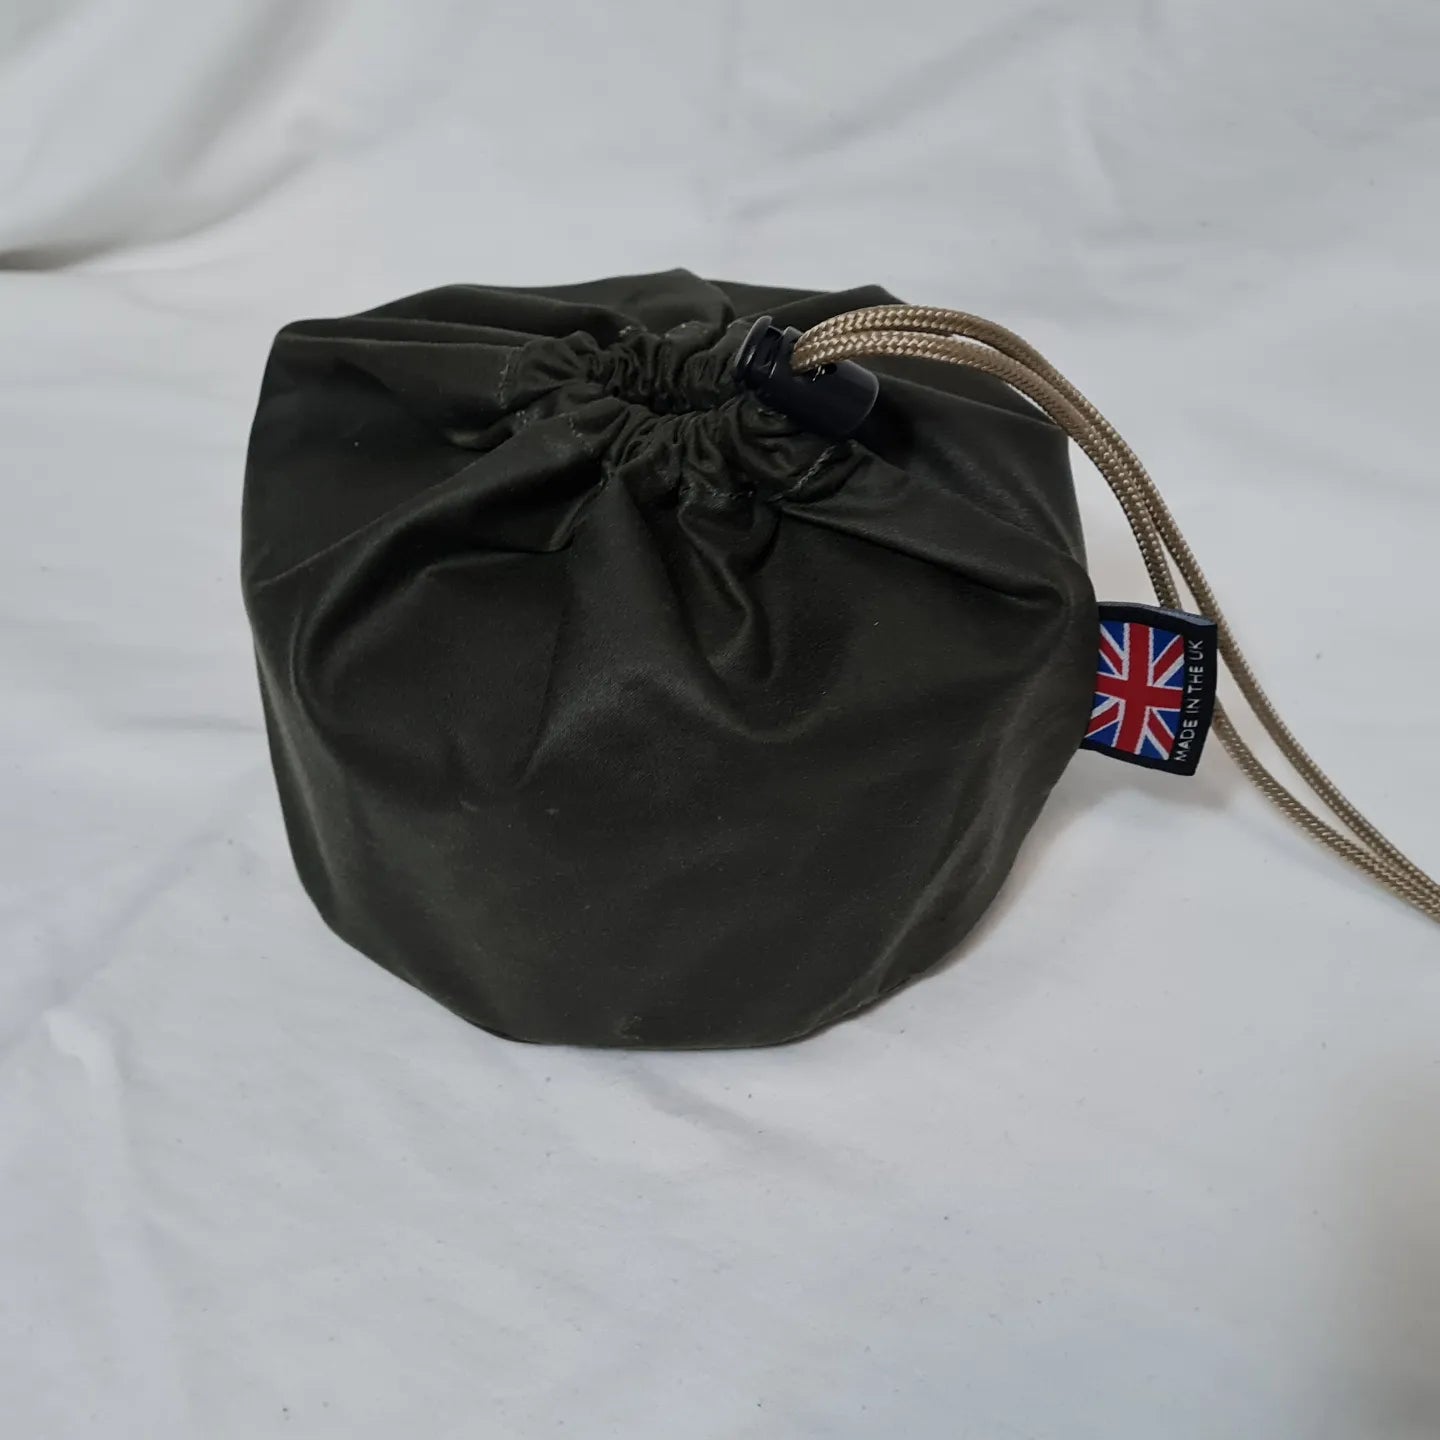 Waxed canvas bag for zebra 14cm lunch box.